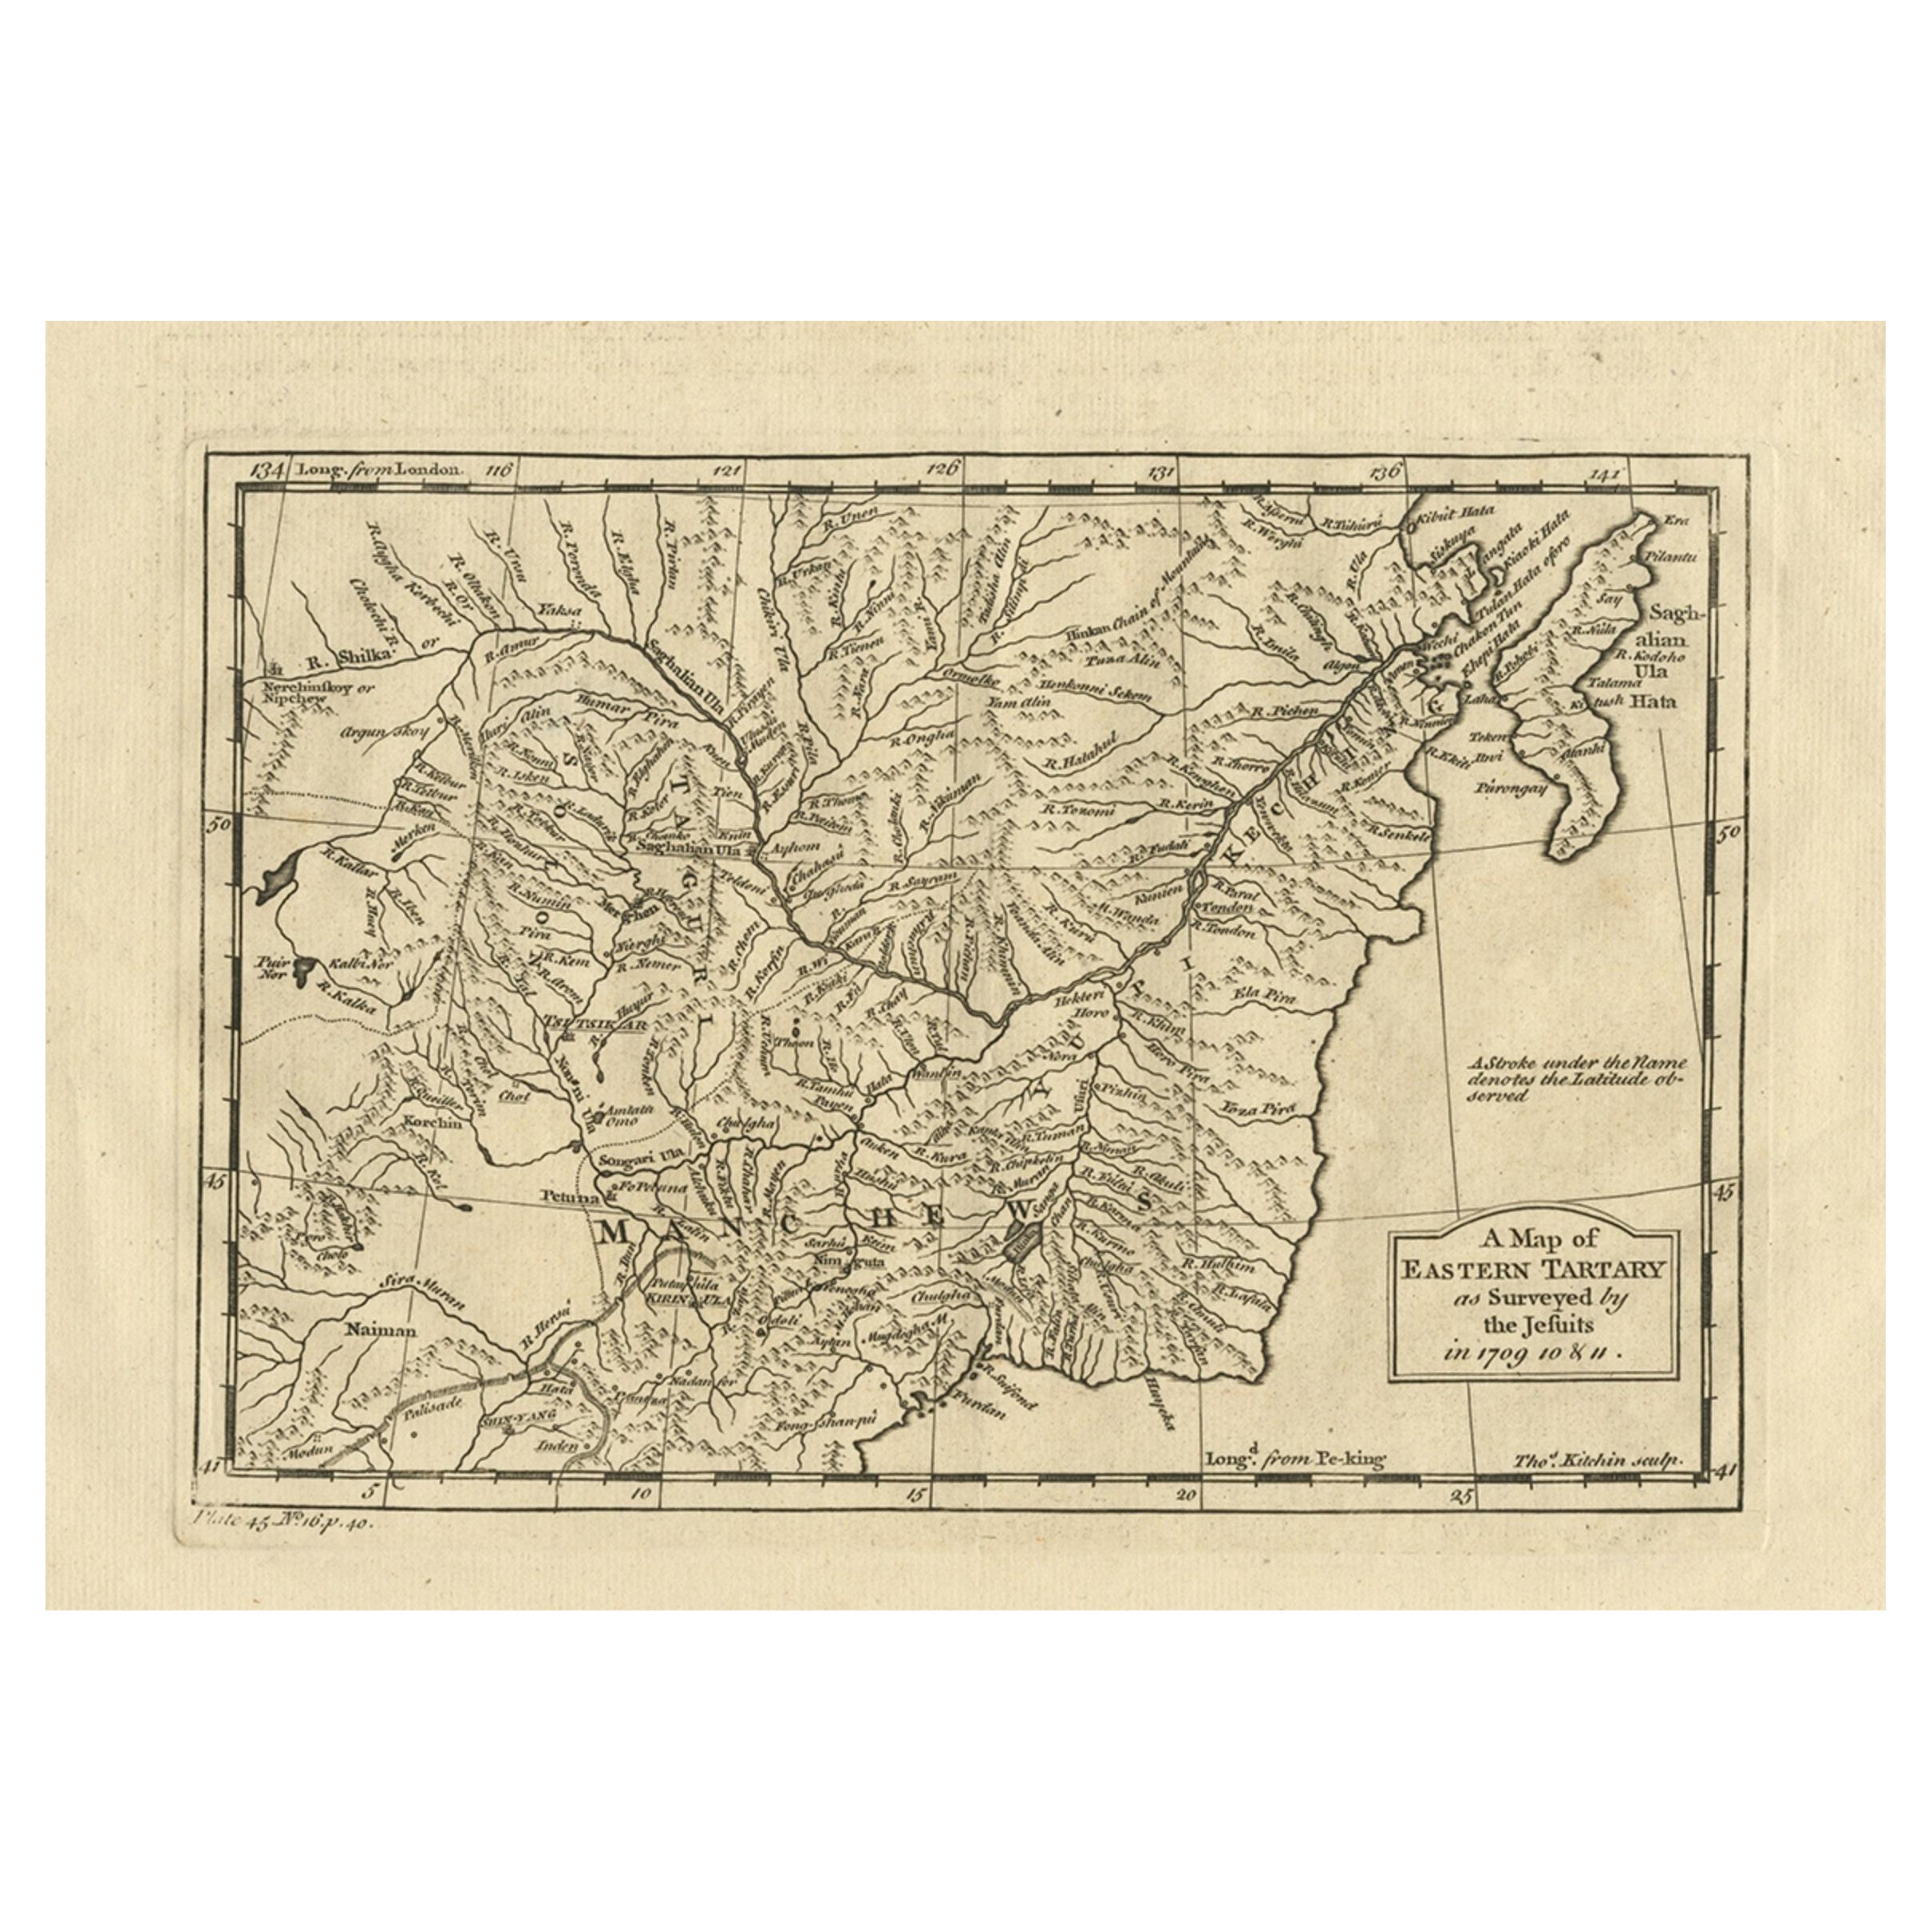 Antique Map of Eastern Tartary as Surveyed by the Jesuits, 1746